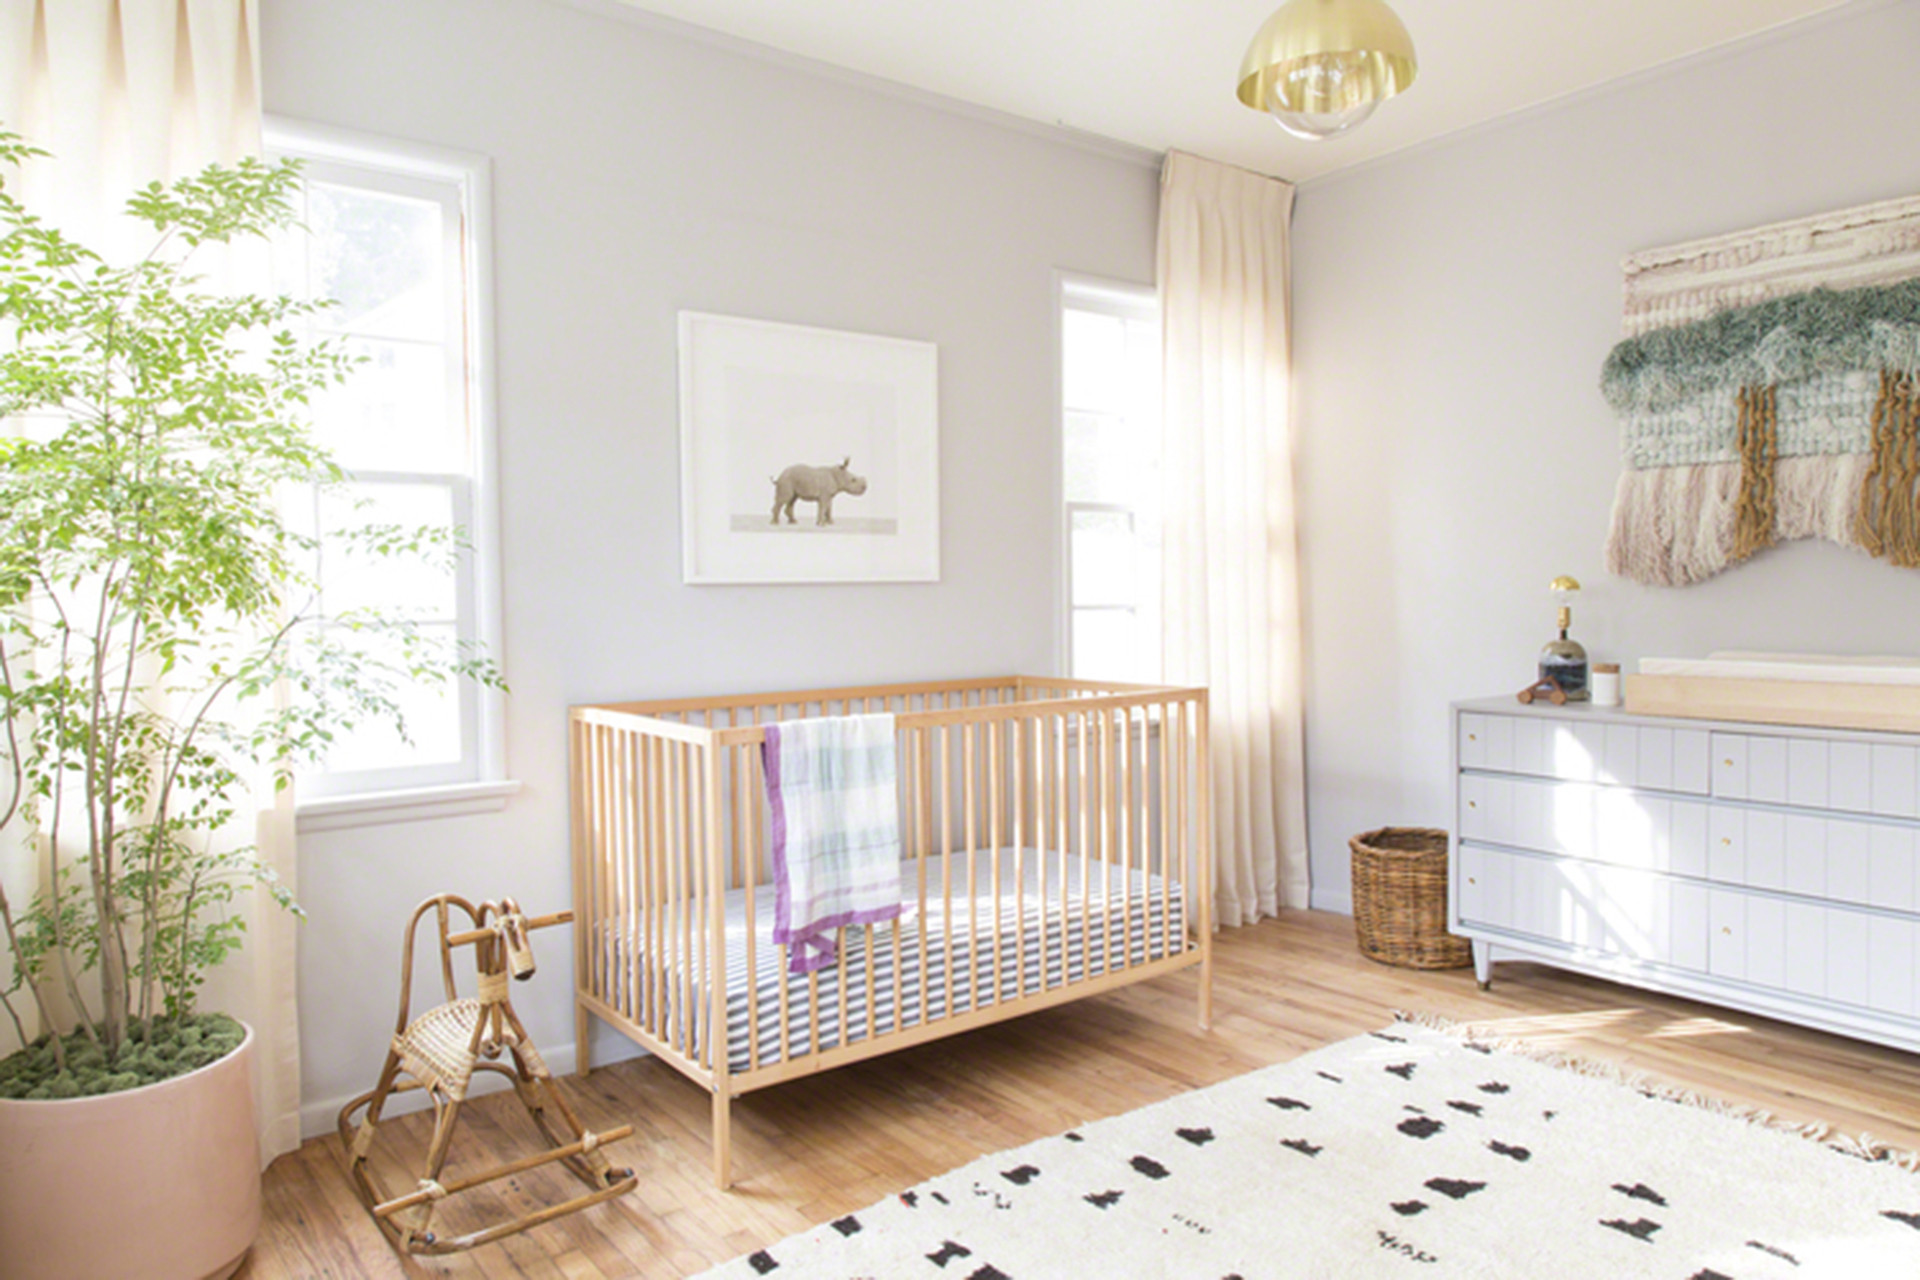 Baby Decorating Room
 7 Hottest baby room trends for 2016